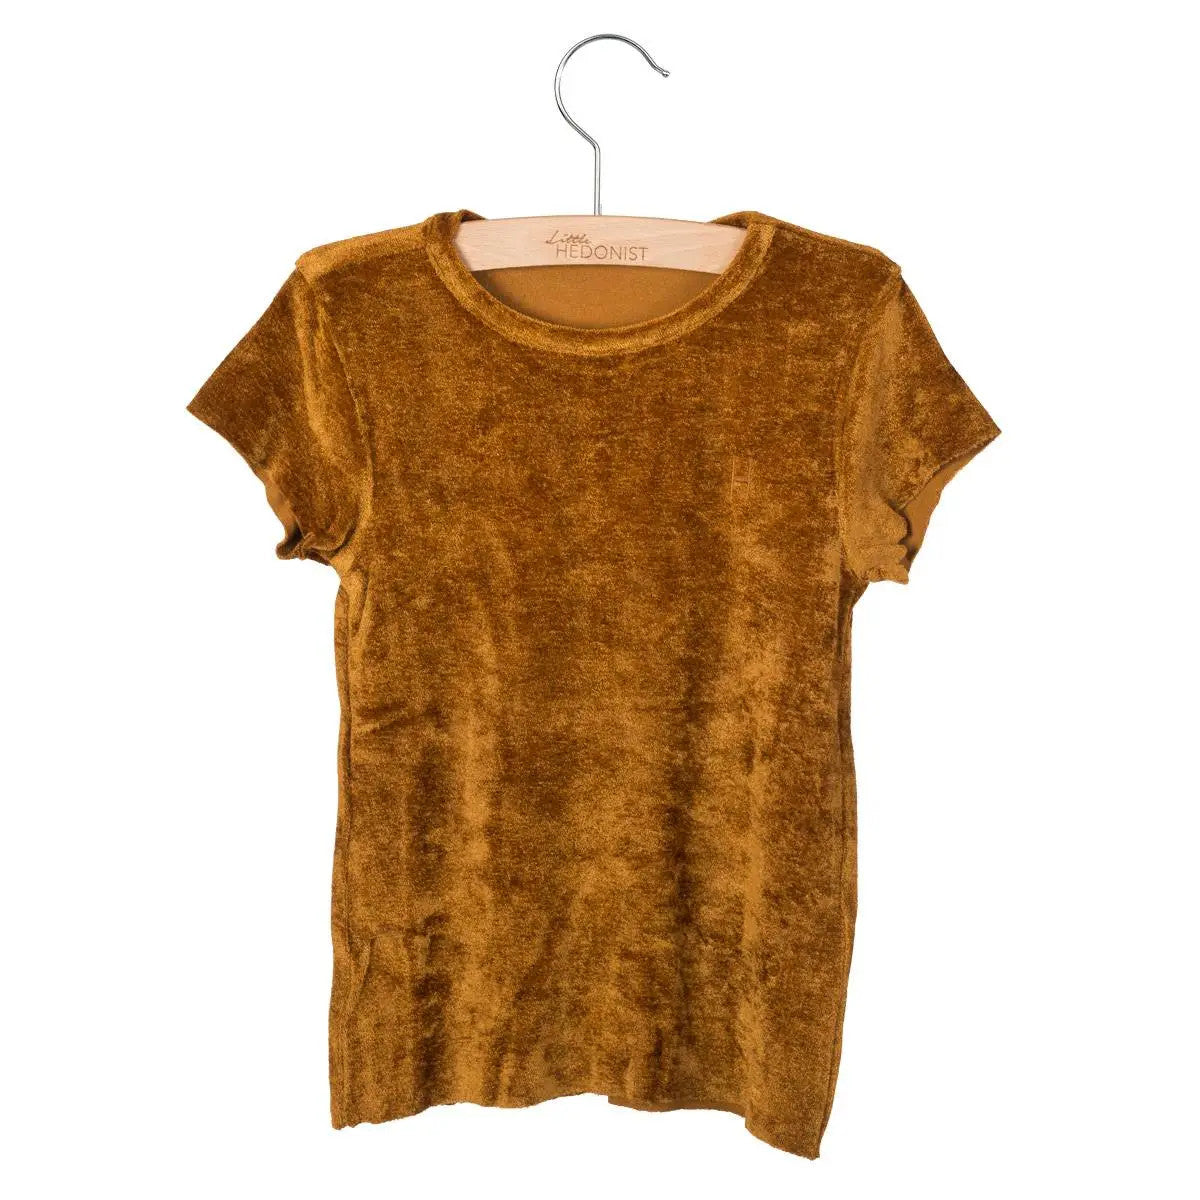 Little Hedonist thick unisex organic cotton t-shirt in gold